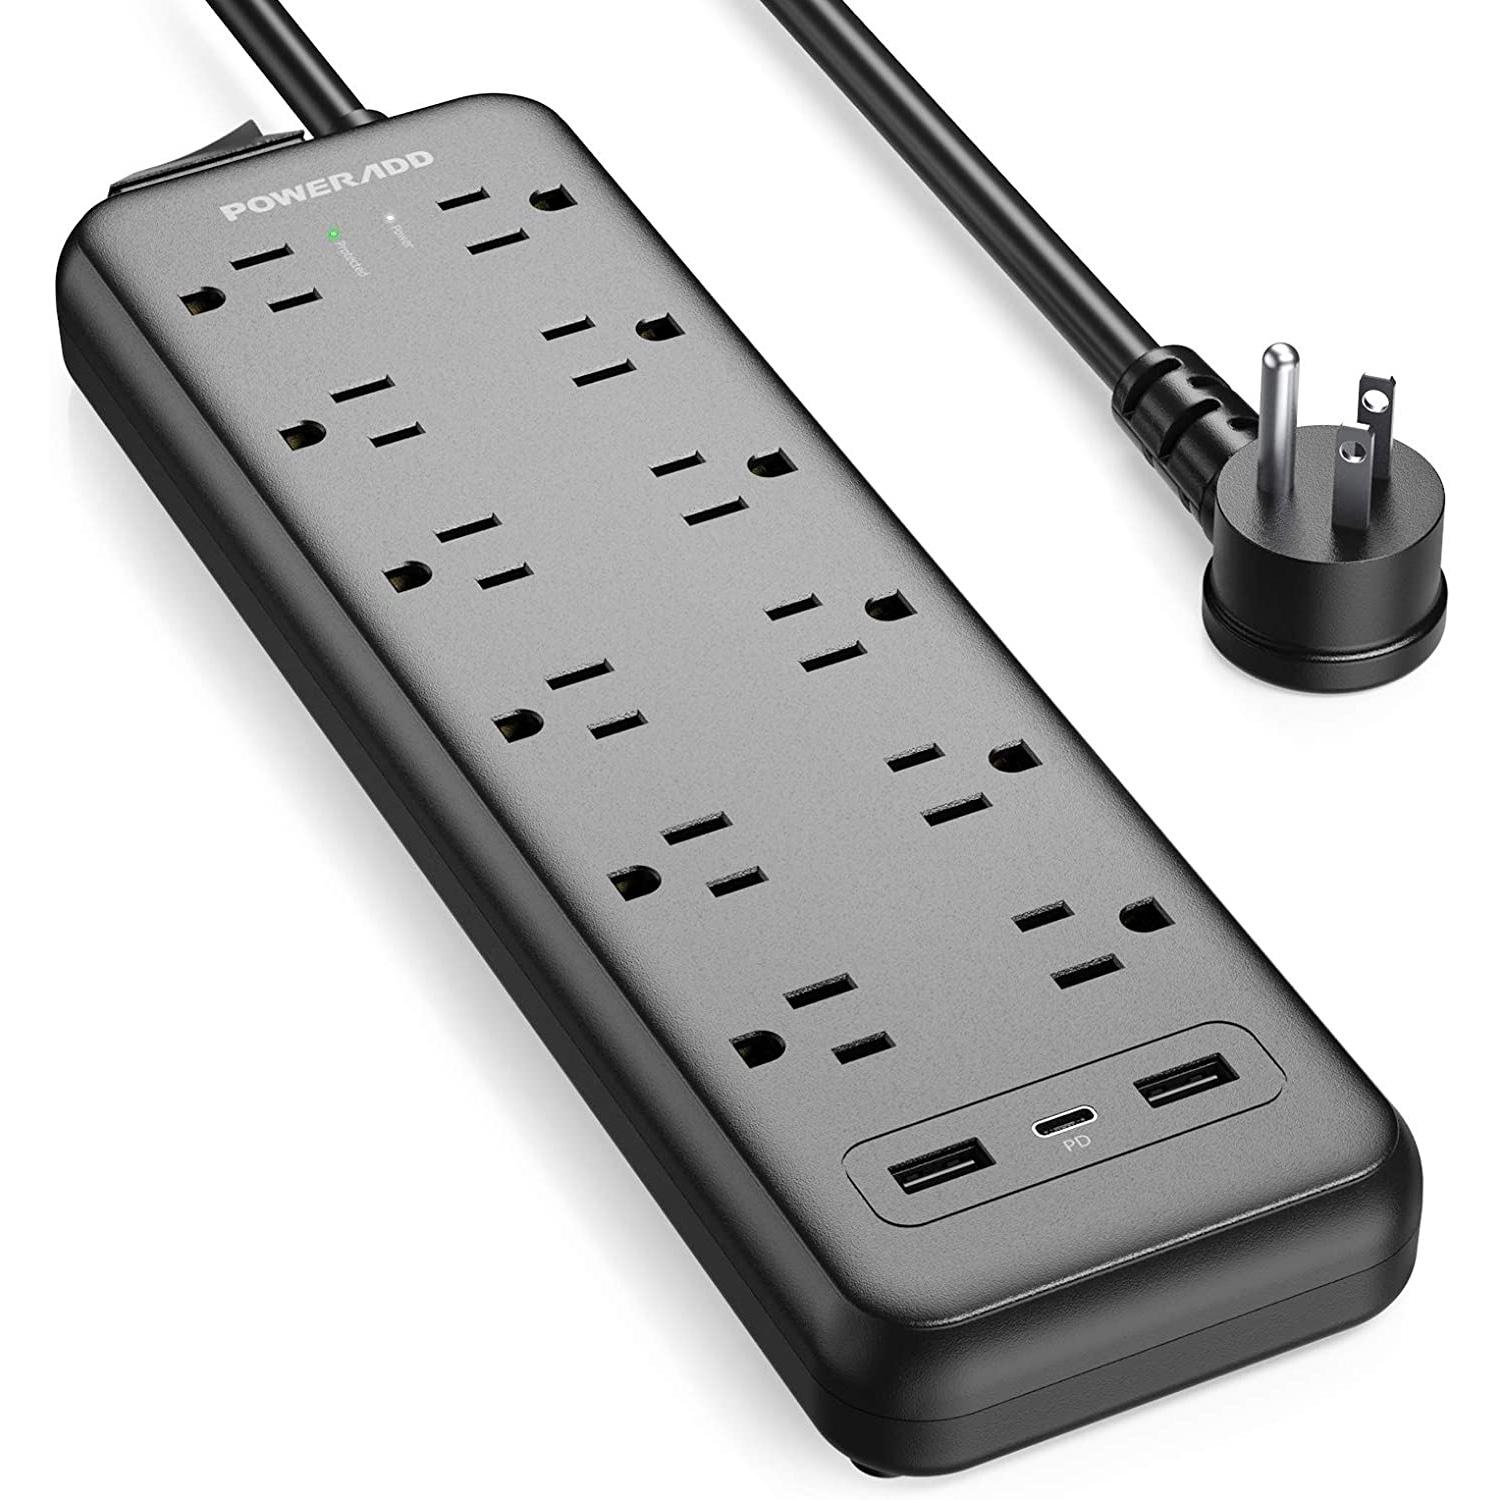 Poweradd Power Strip Surge Protector for $14.99 Shipped